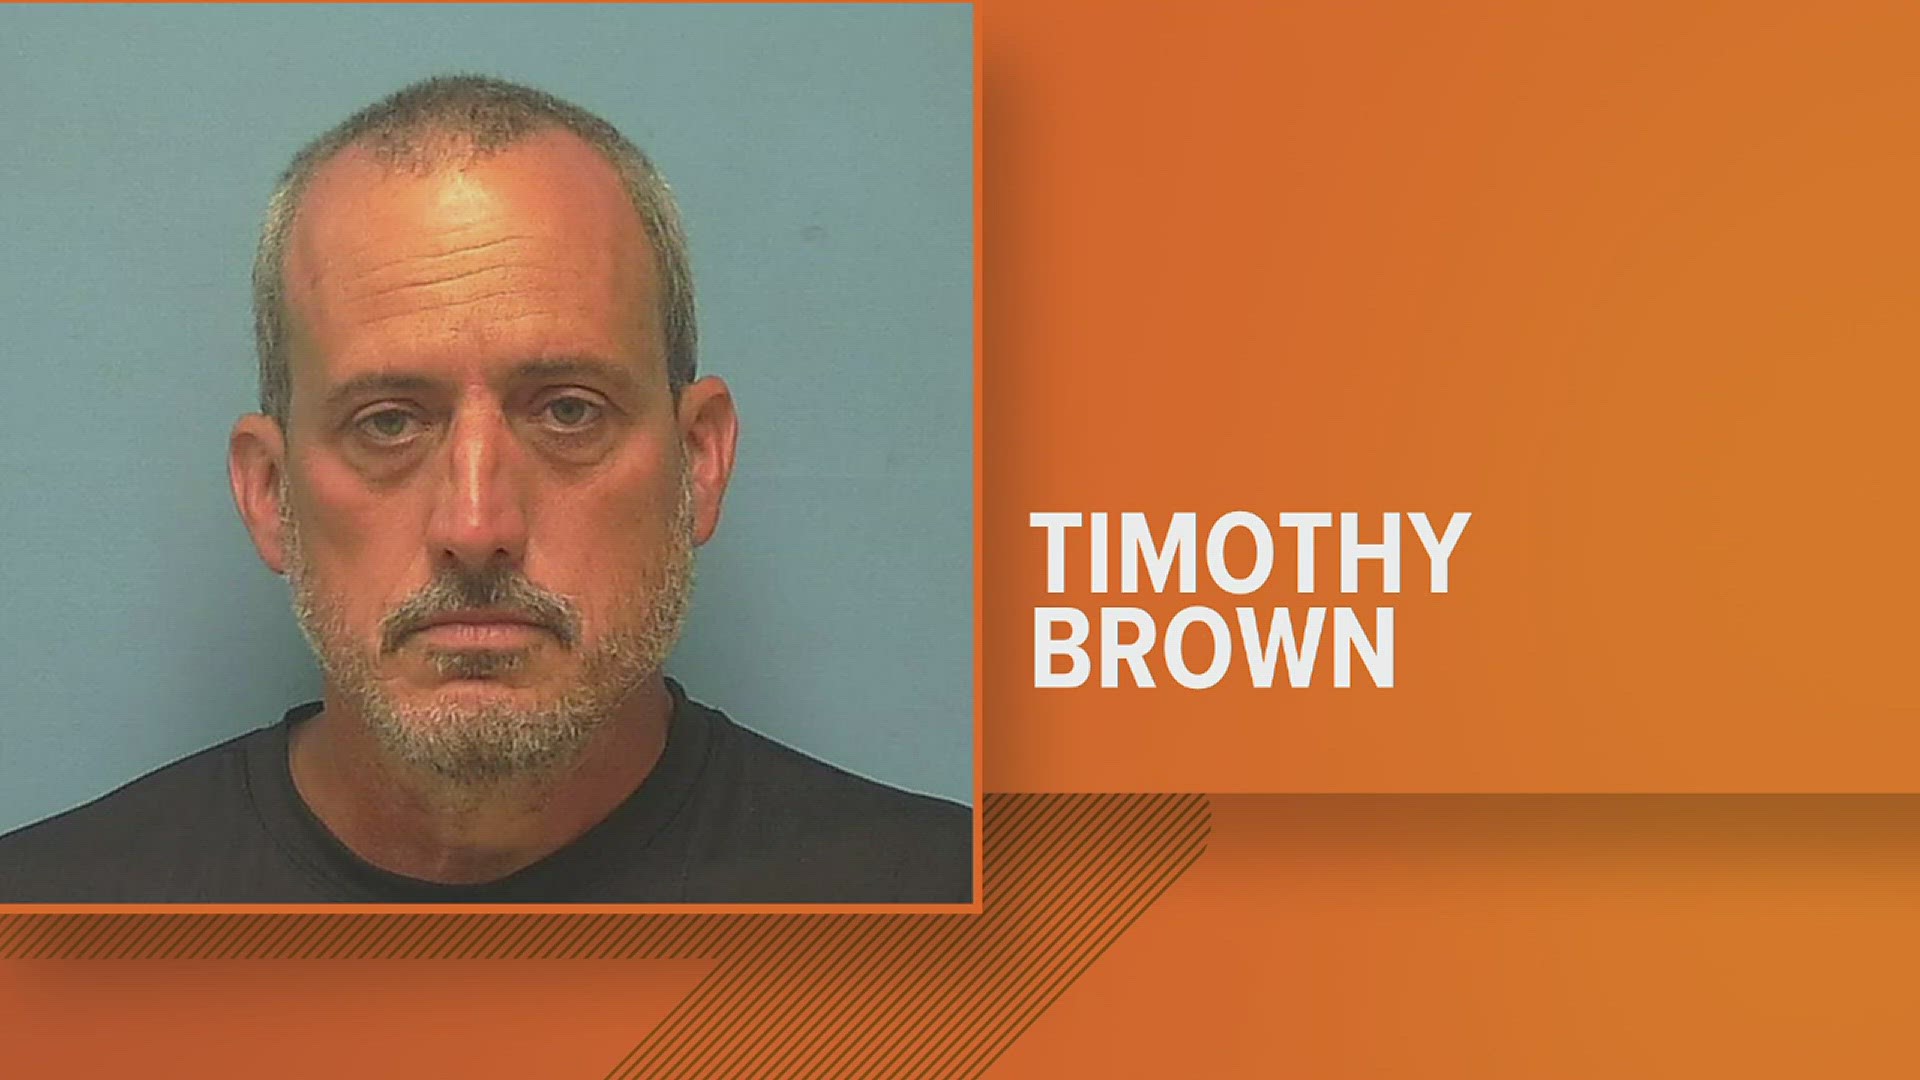 A 52-year-old Vidor man is behind bars in Orange County after being indicted on child pornography possession charges last week.